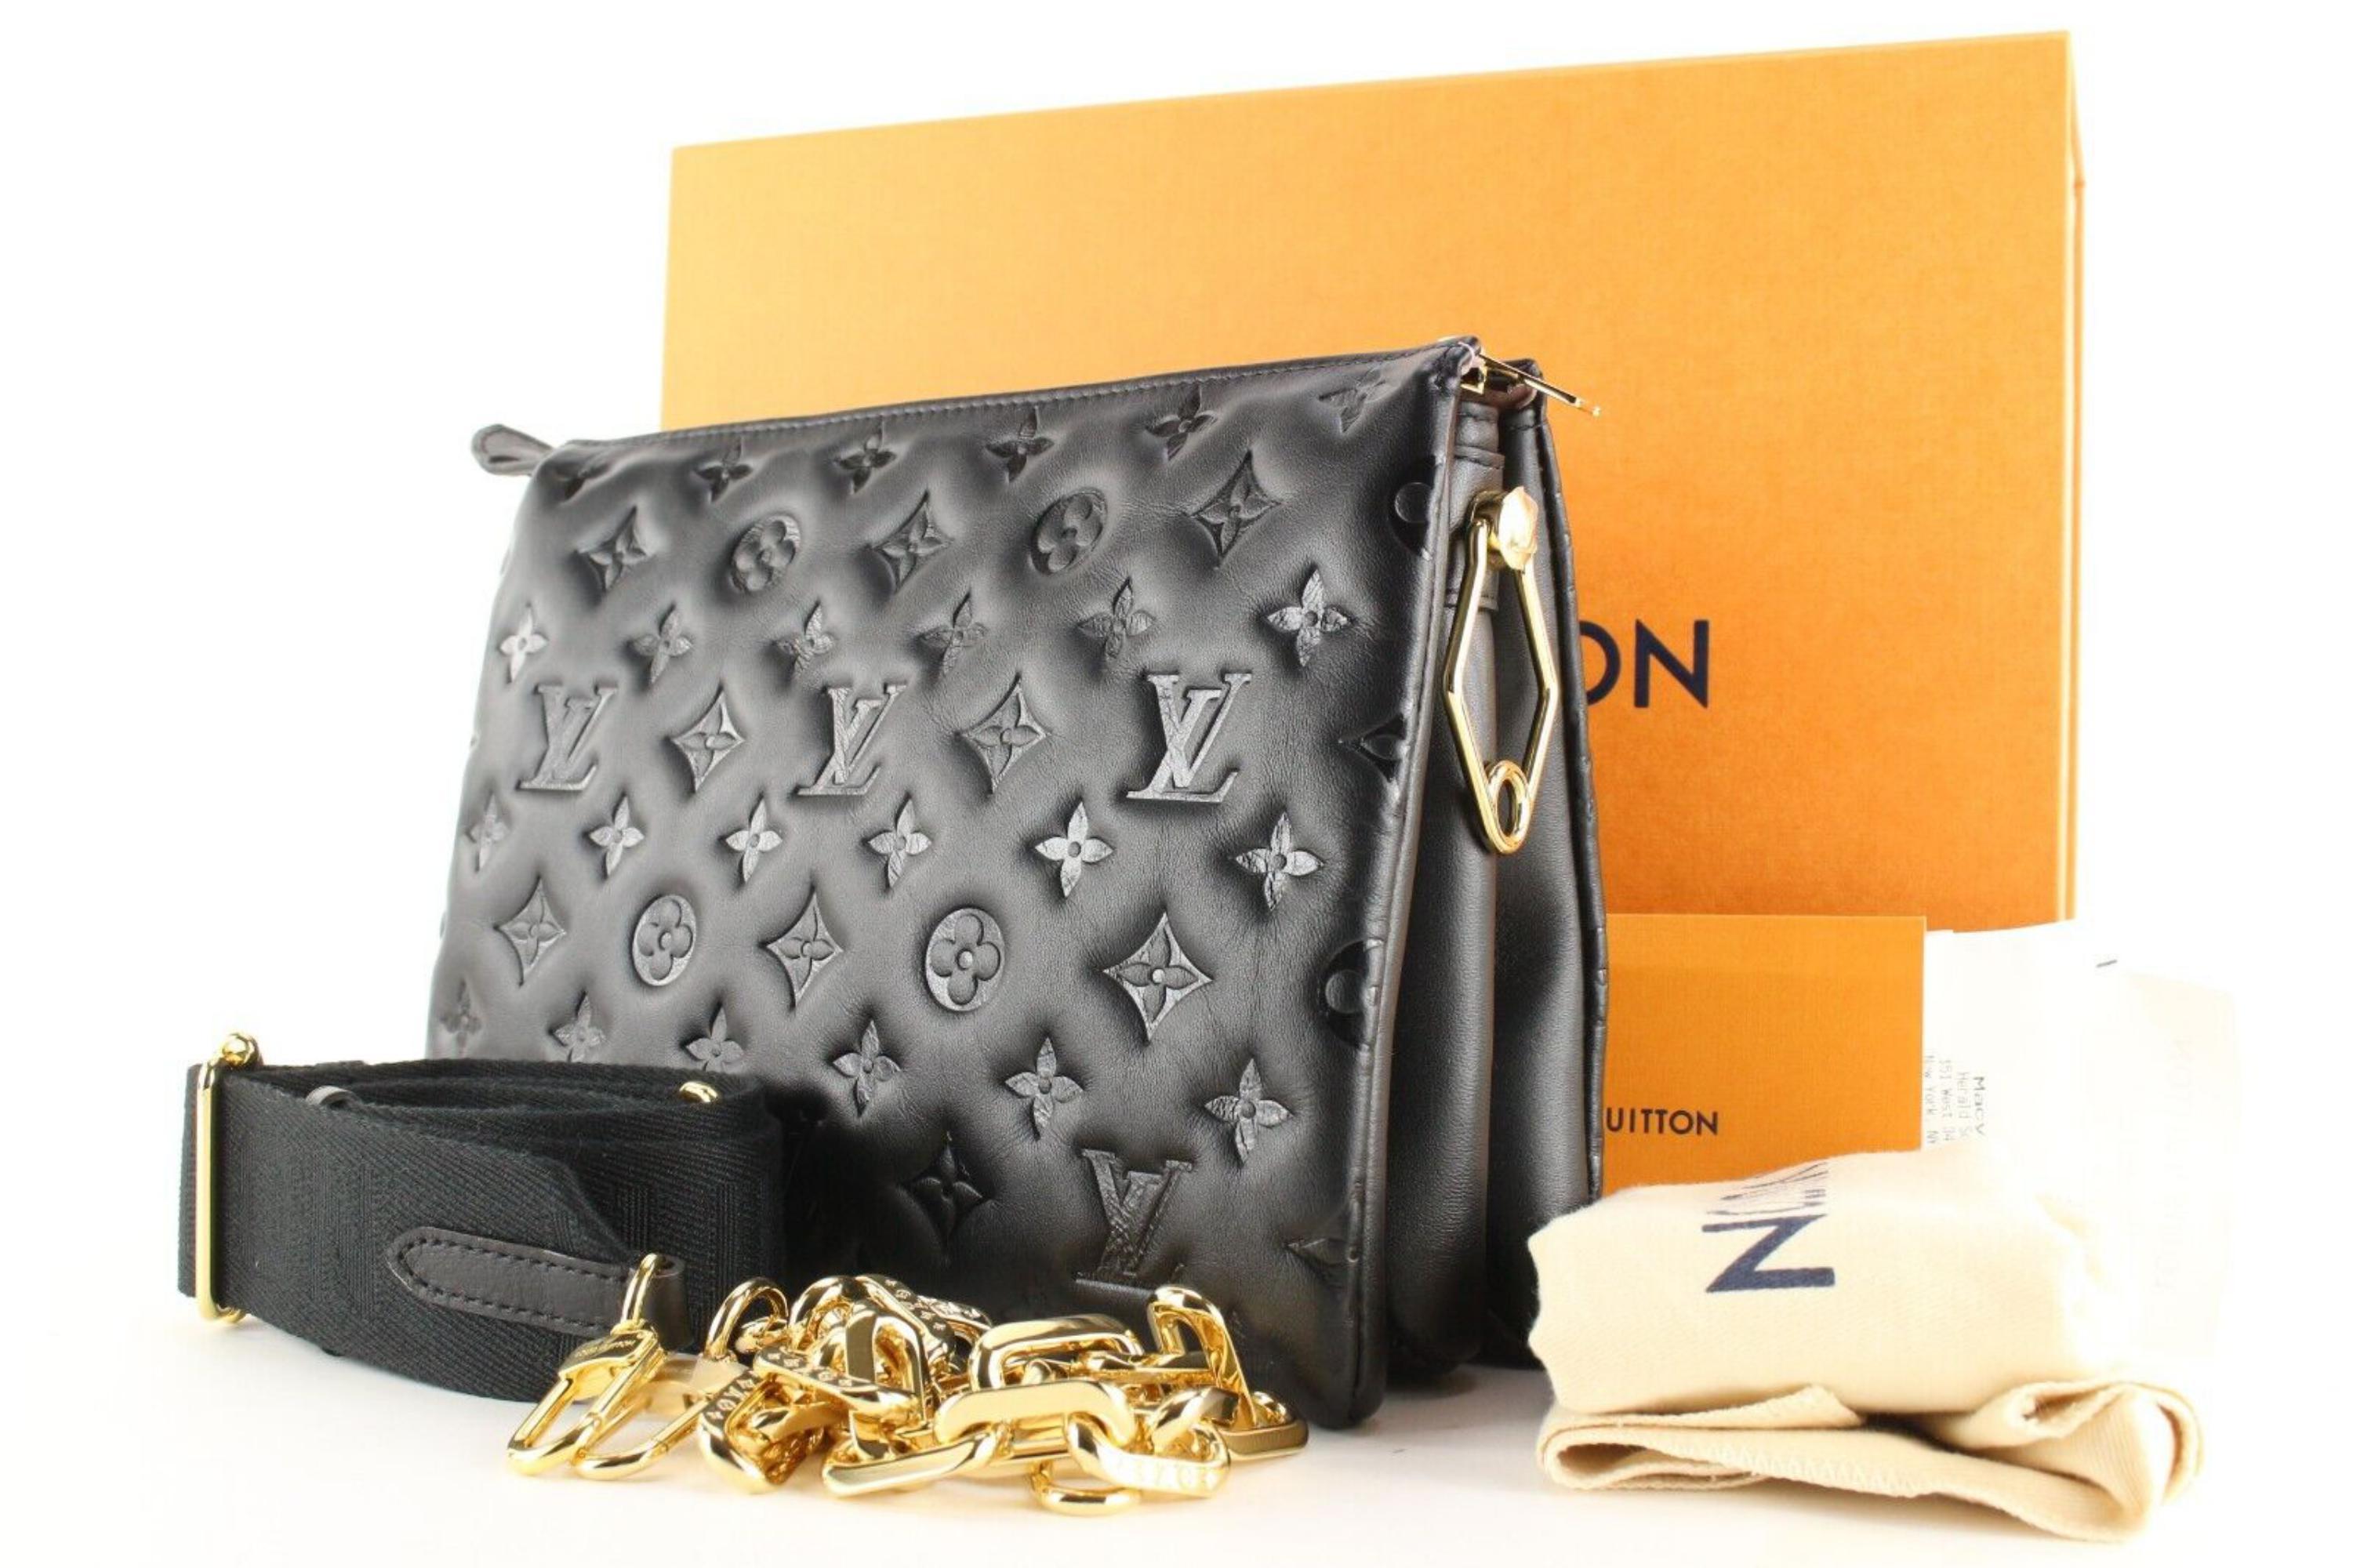 Louis Vuitton Gold Chain Black Lambskin Monogram Coussin PM 7LVJ0106
Date Code/Serial Number: RFID

Made In: France

Measurements: Length: 10.5 